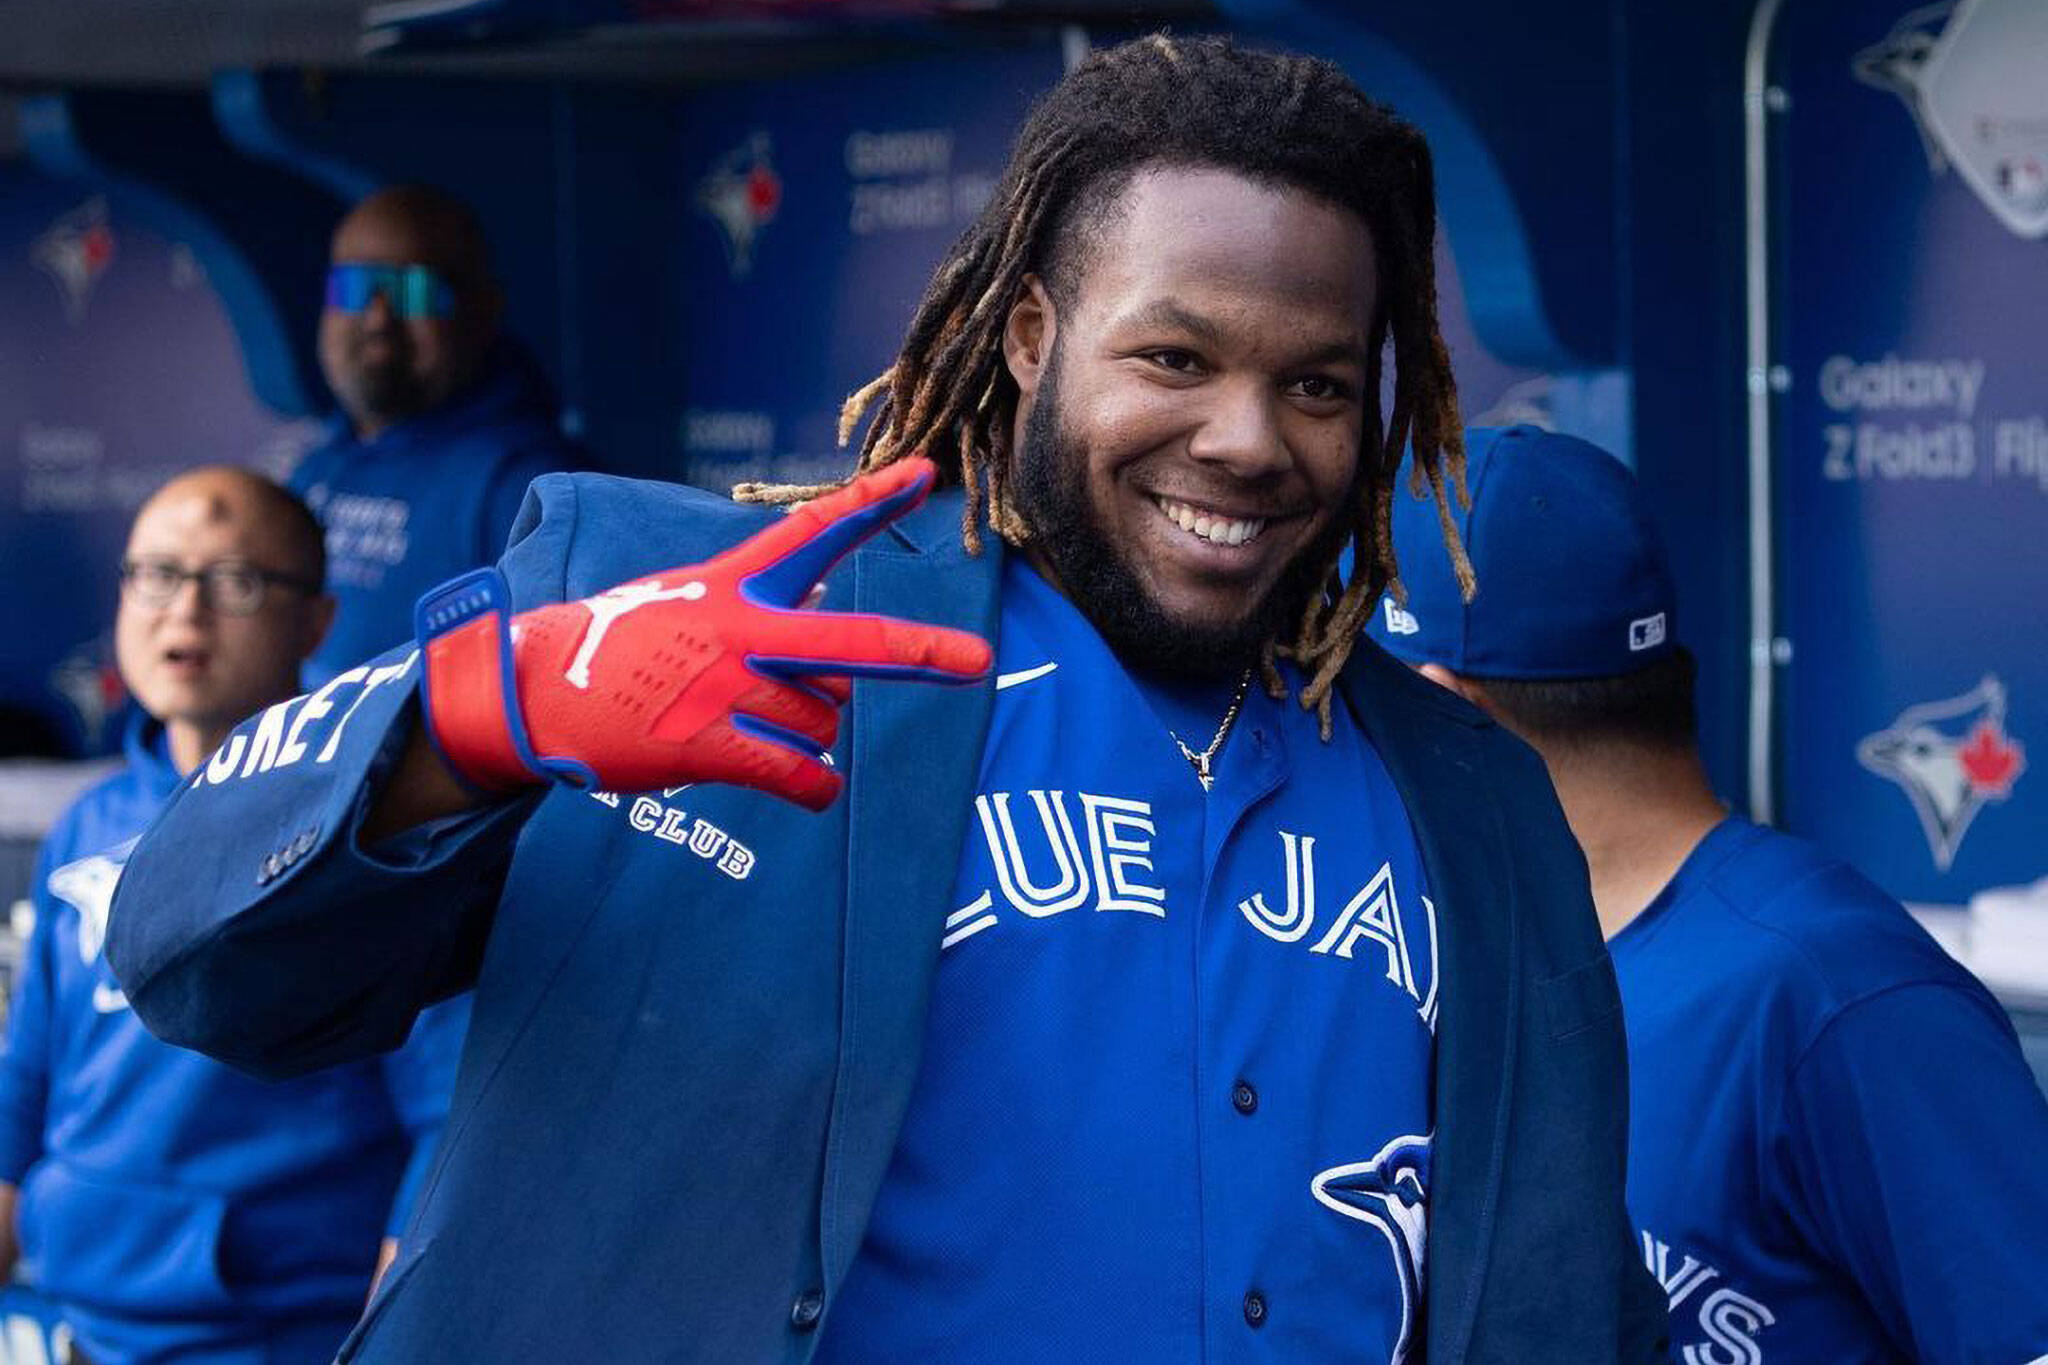 Toronto Blue Jays fans are angry over lack of team All-Star merch